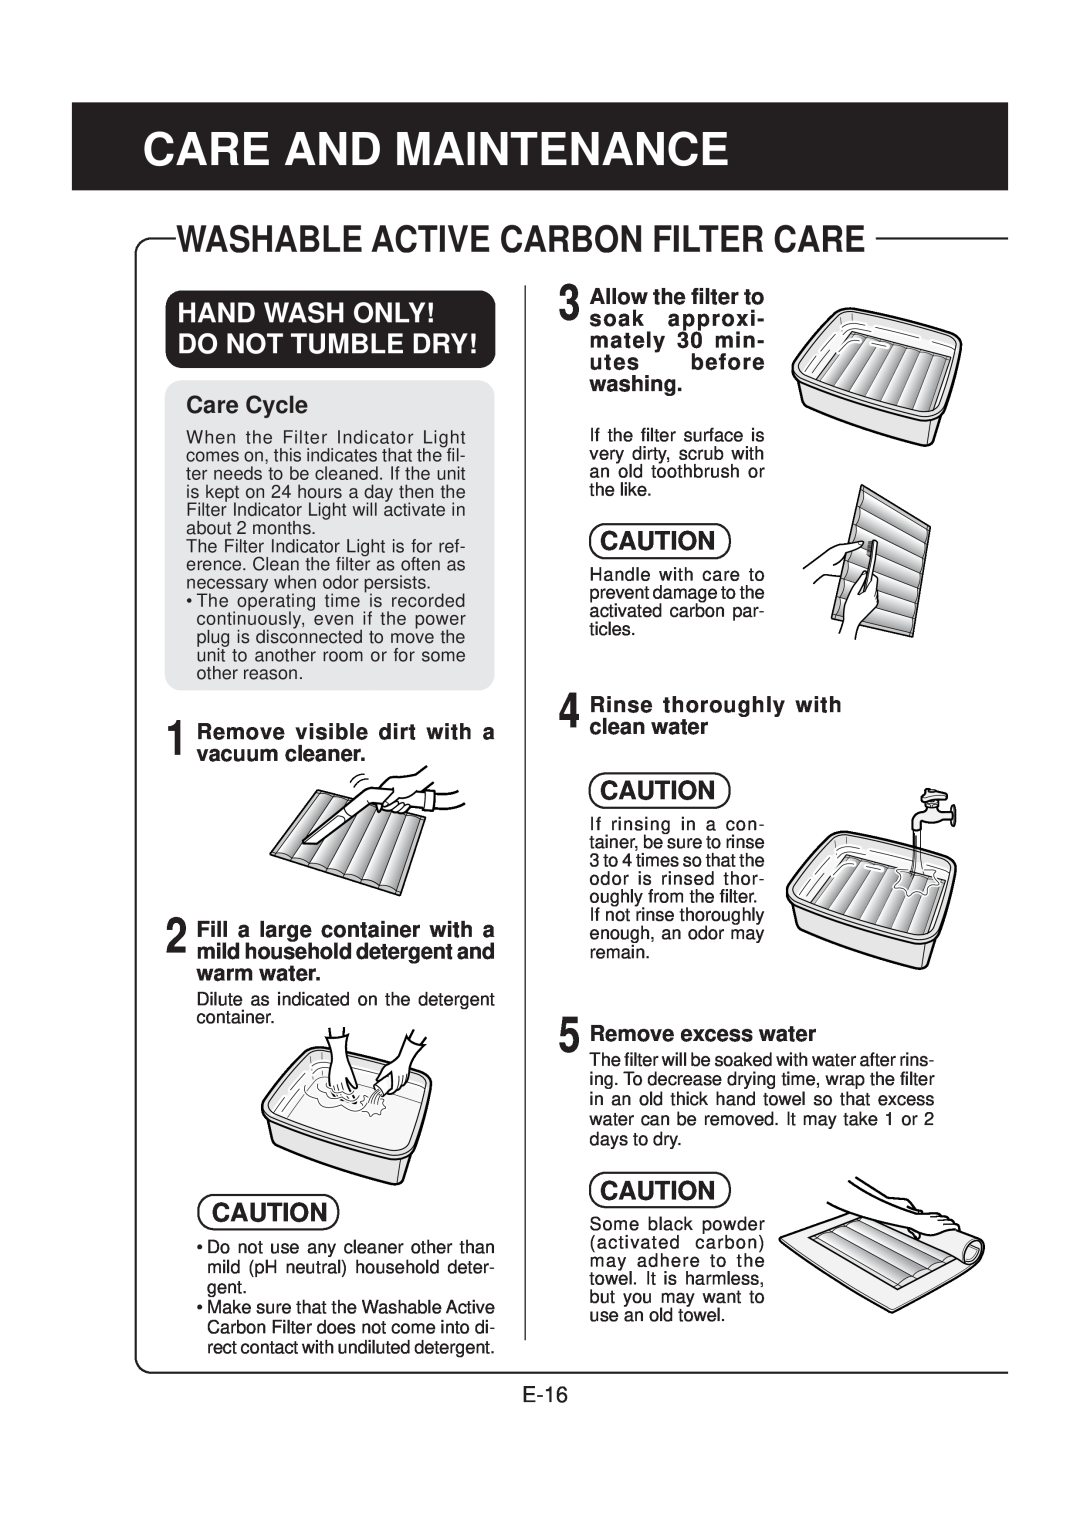 Sharp FP-N60CX Care And Maintenance, Washable Active Carbon Filter Care, Hand Wash Only! Do Not Tumble Dry, E-16 